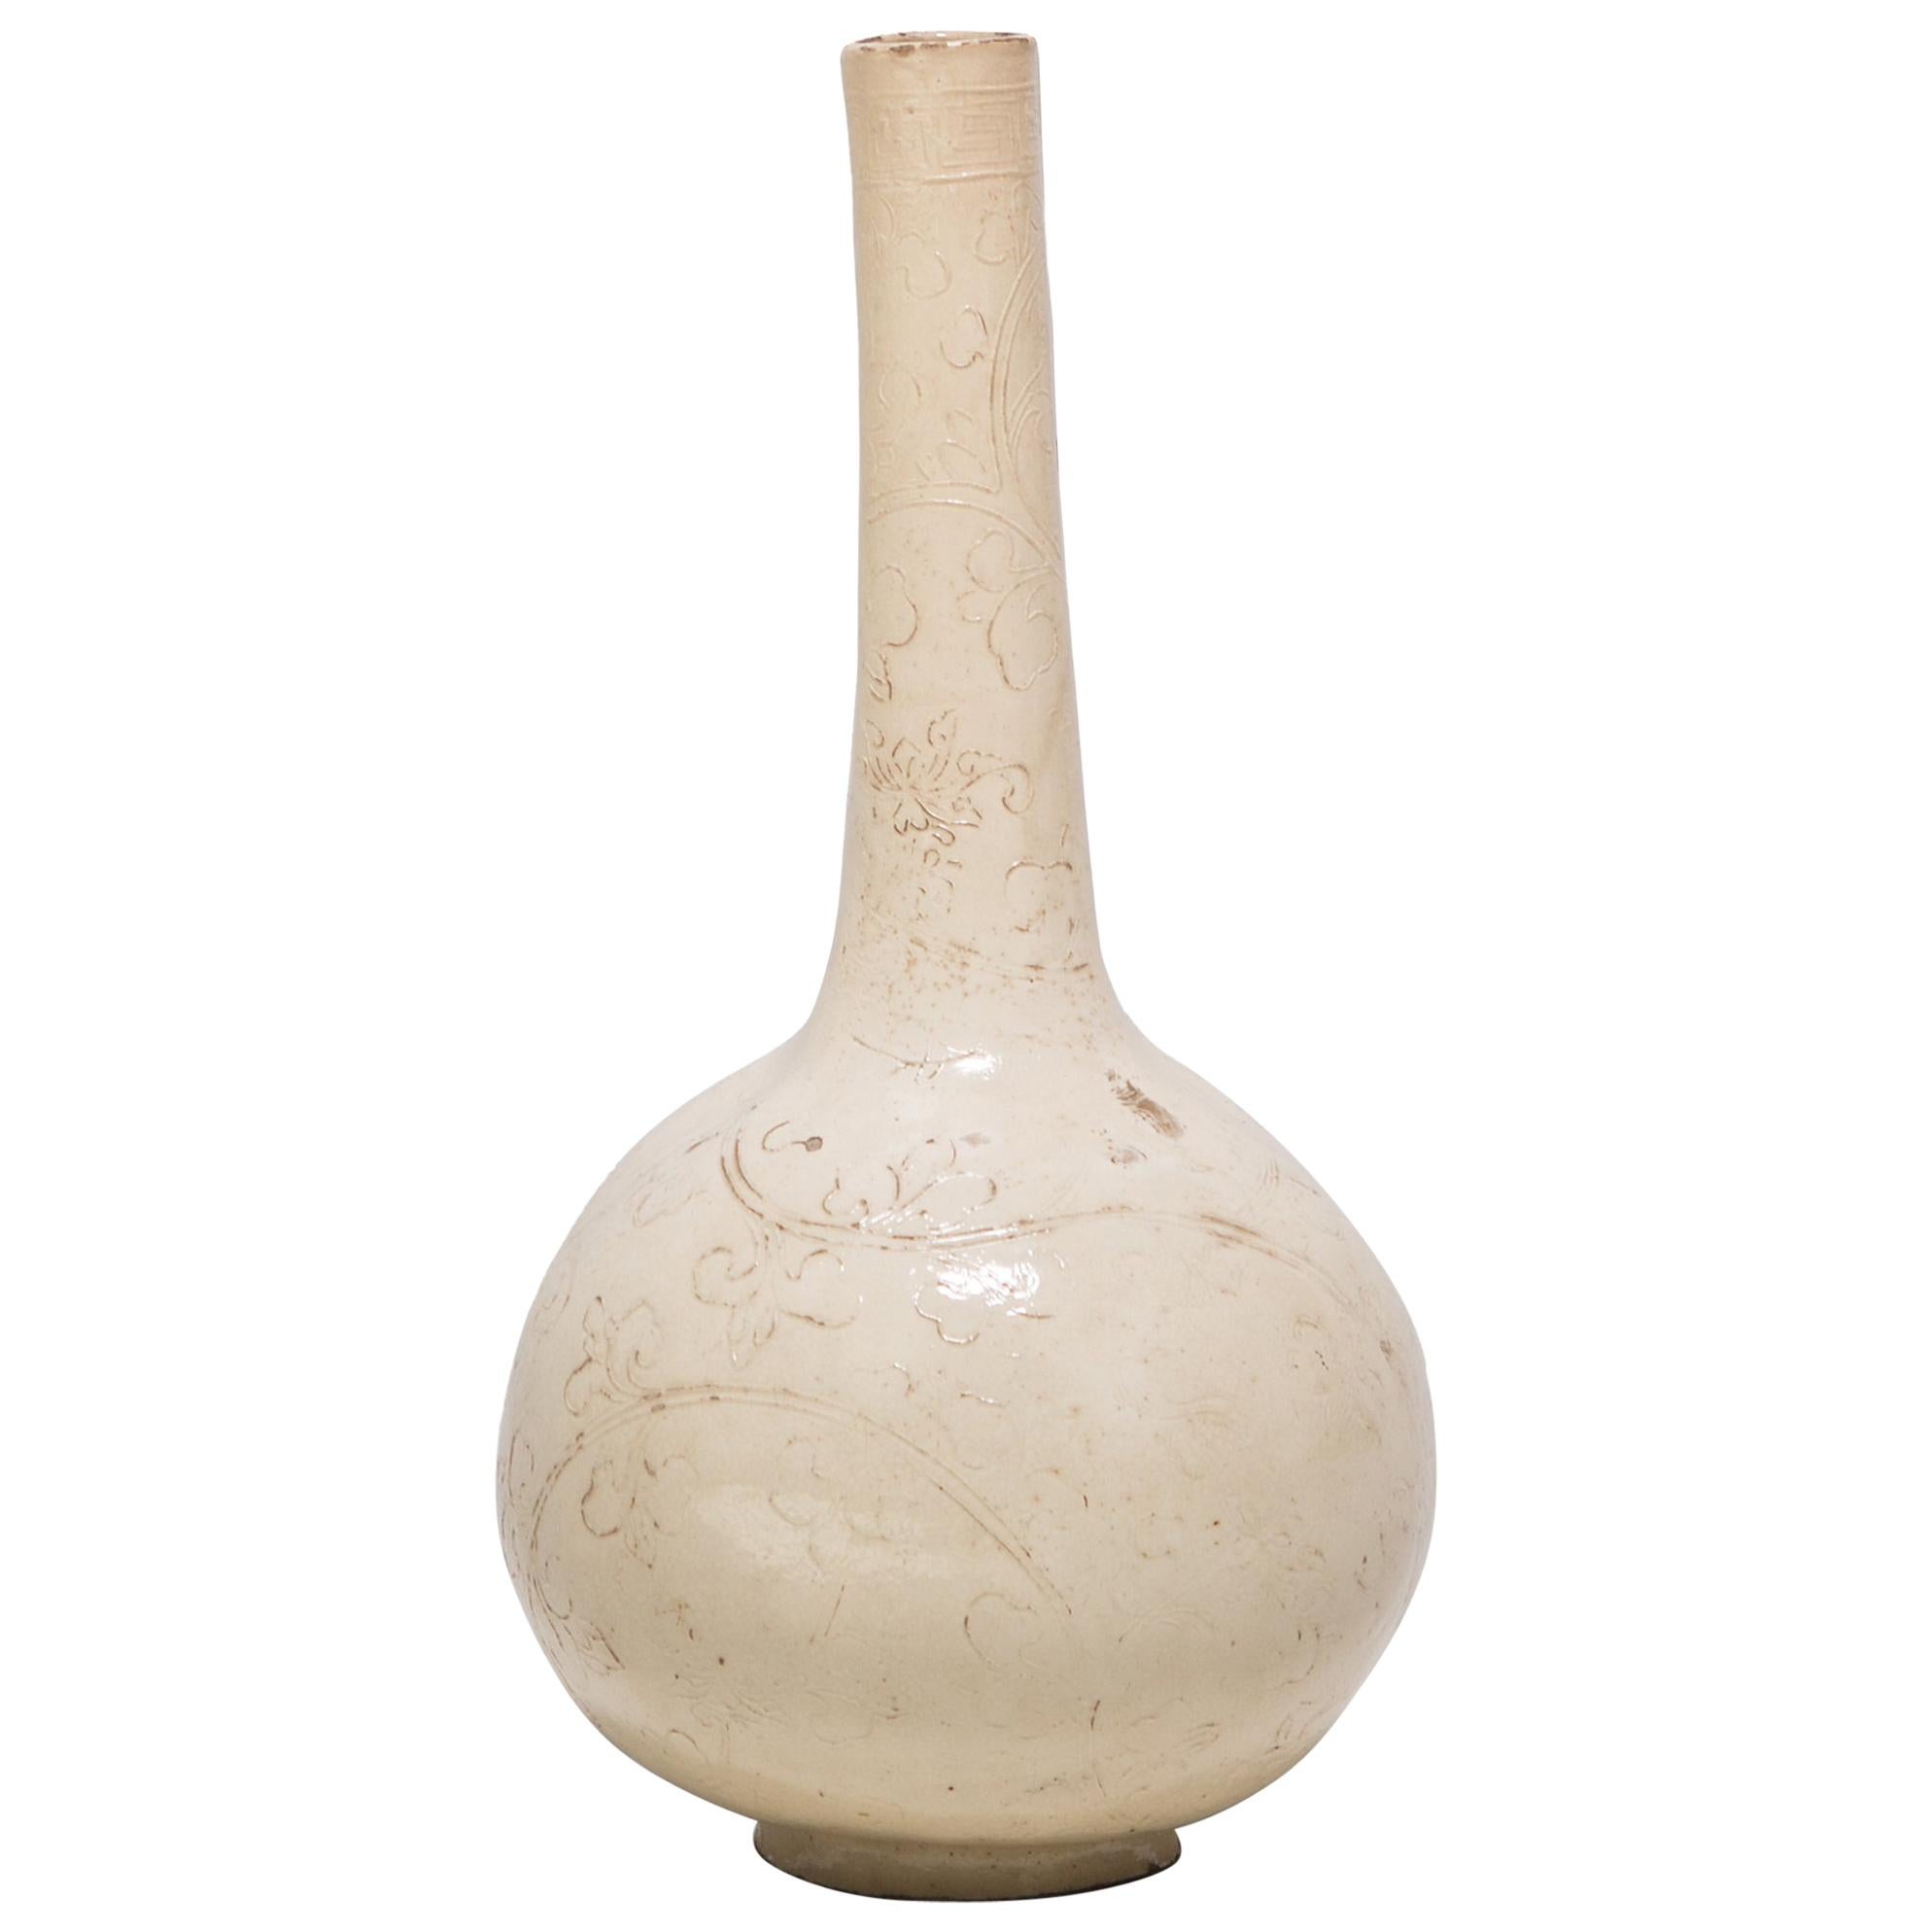 Vase chinois Dingyao, vers 1100